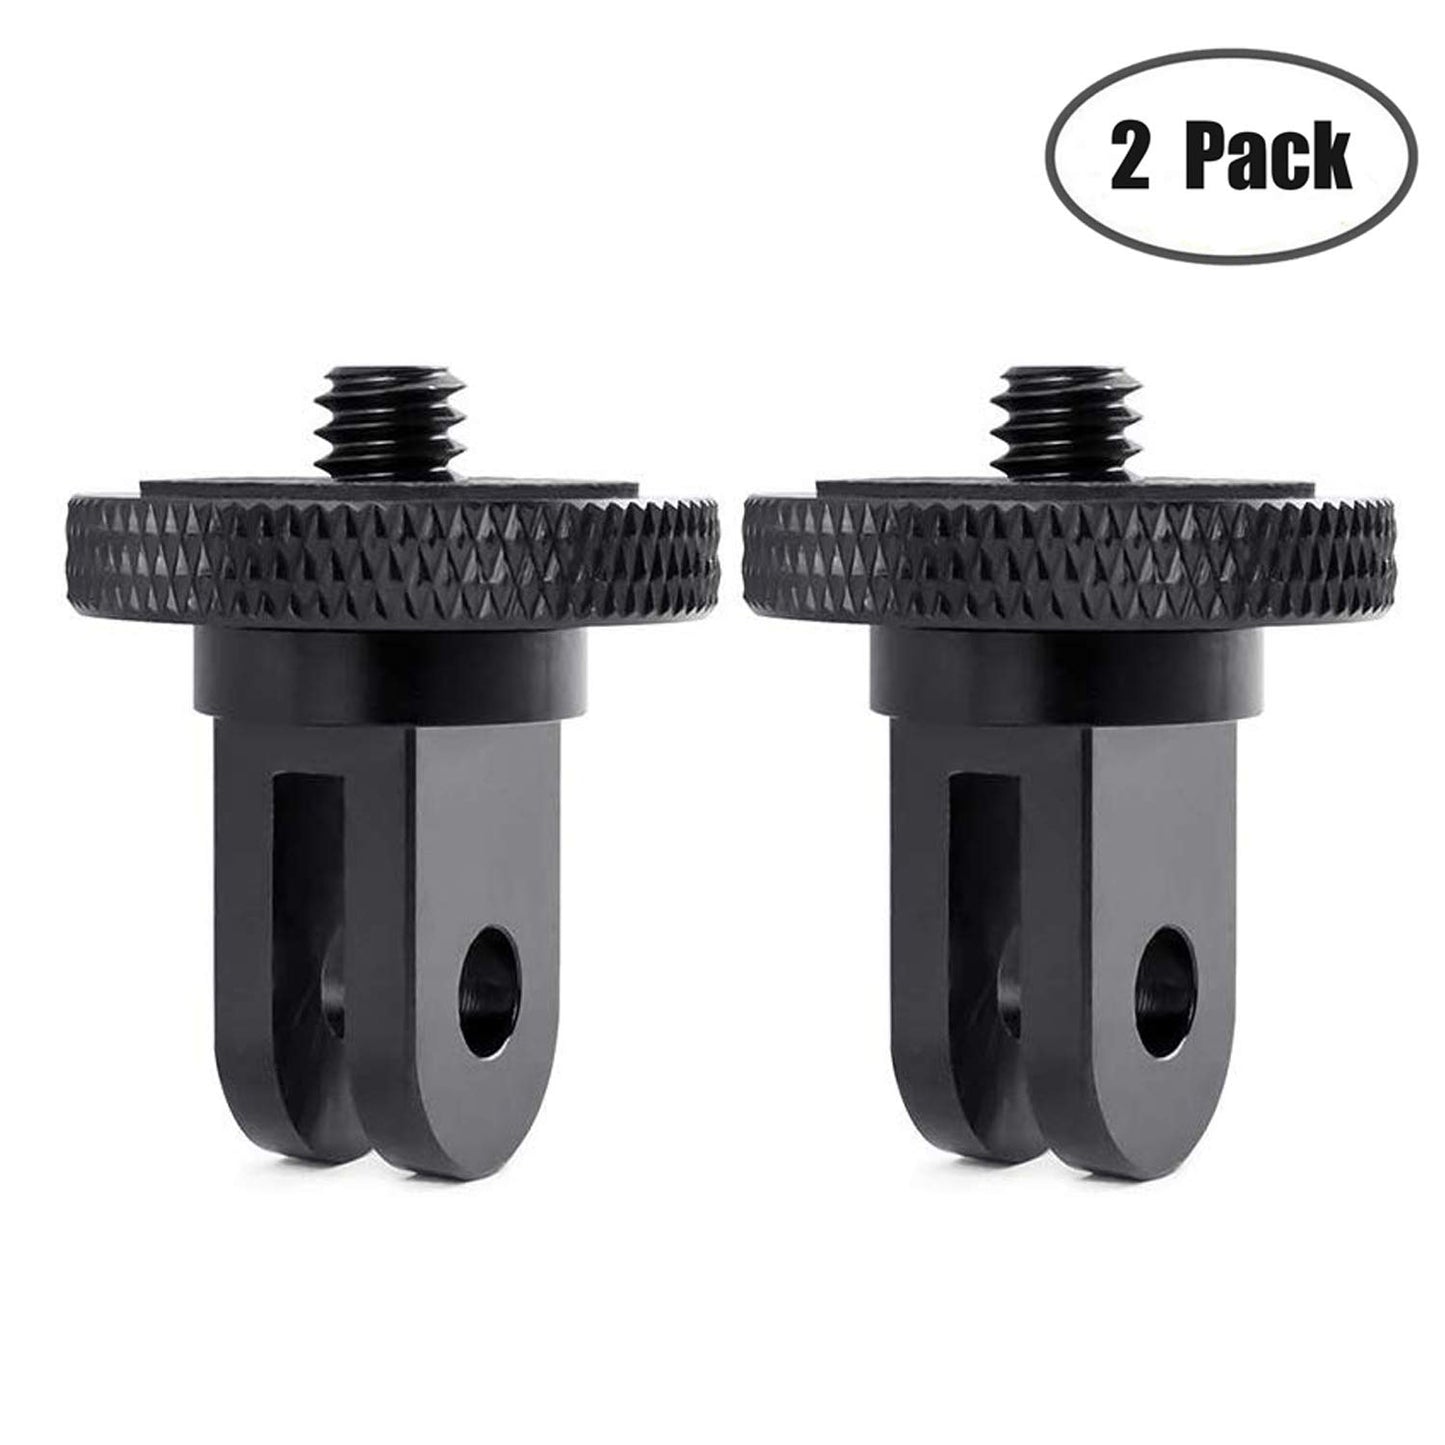 Camera Tripod Mount for Gopro Adapter, 2Pcs 1/4-20 Screw Conversion Adapter for GoPro Hero10, Insta360 ONE X3, X2, Go 2, Xiaomi Yi and Other Action Cameras